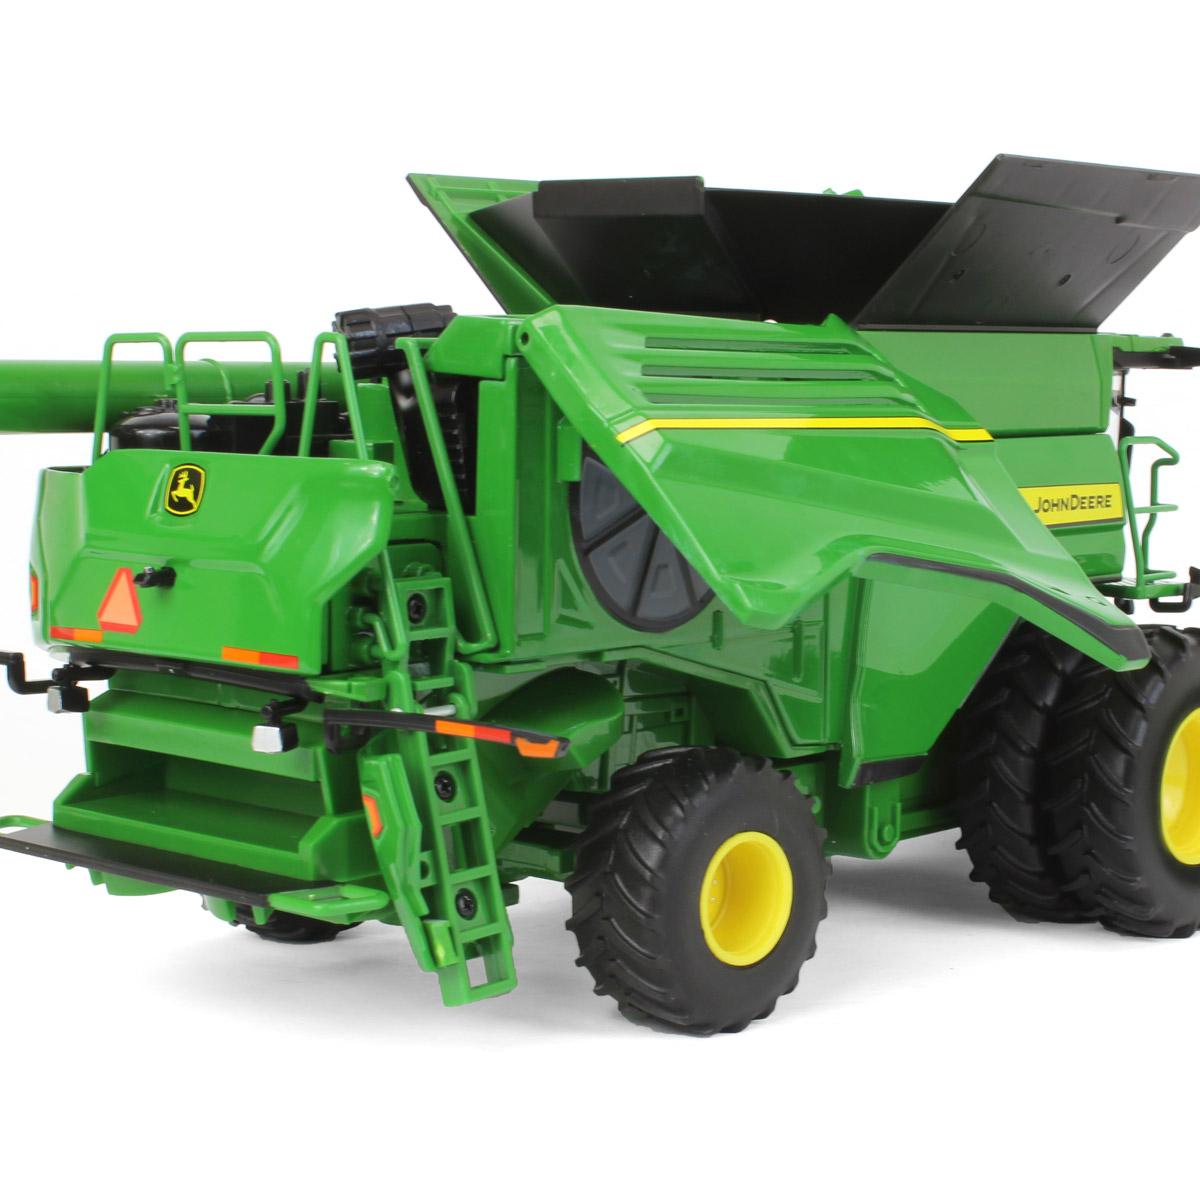 John Deere X9 1000 Combine with Duals and 2 Heads Prestige Collection